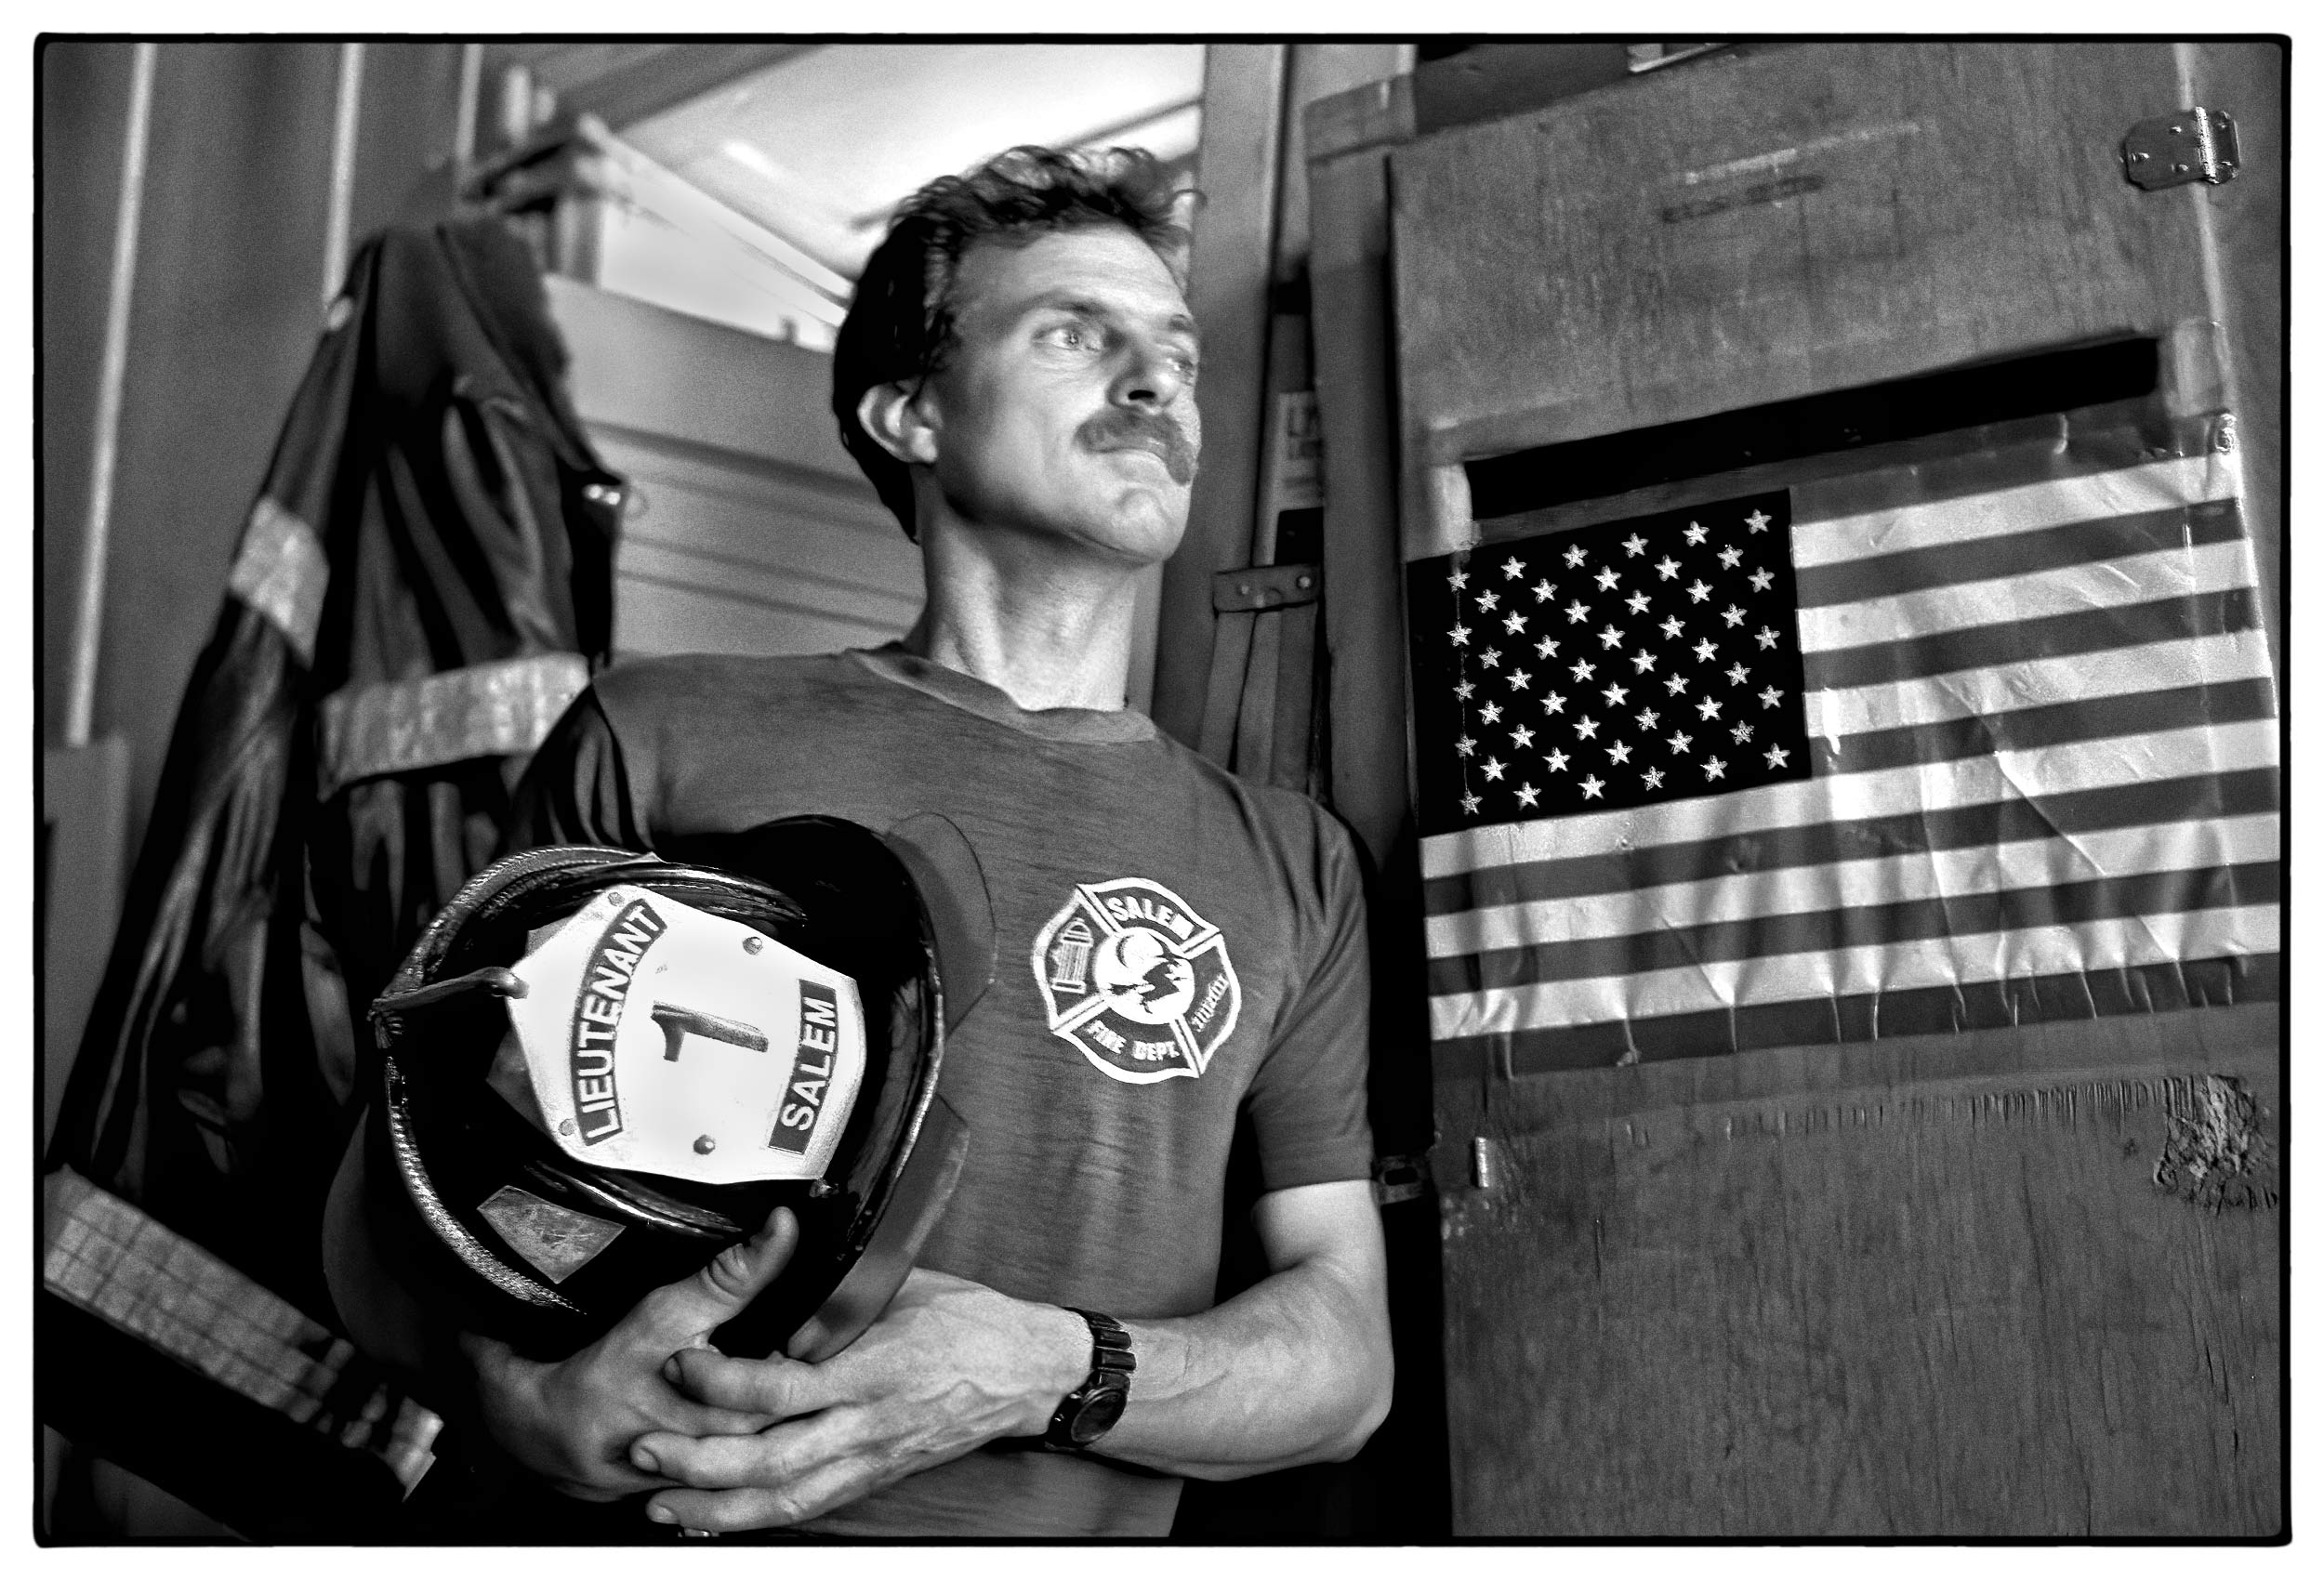 a-lieutenant-from-the-salem-massachusetts-fire-department-poses-for-a-photo-in-the-firehouse